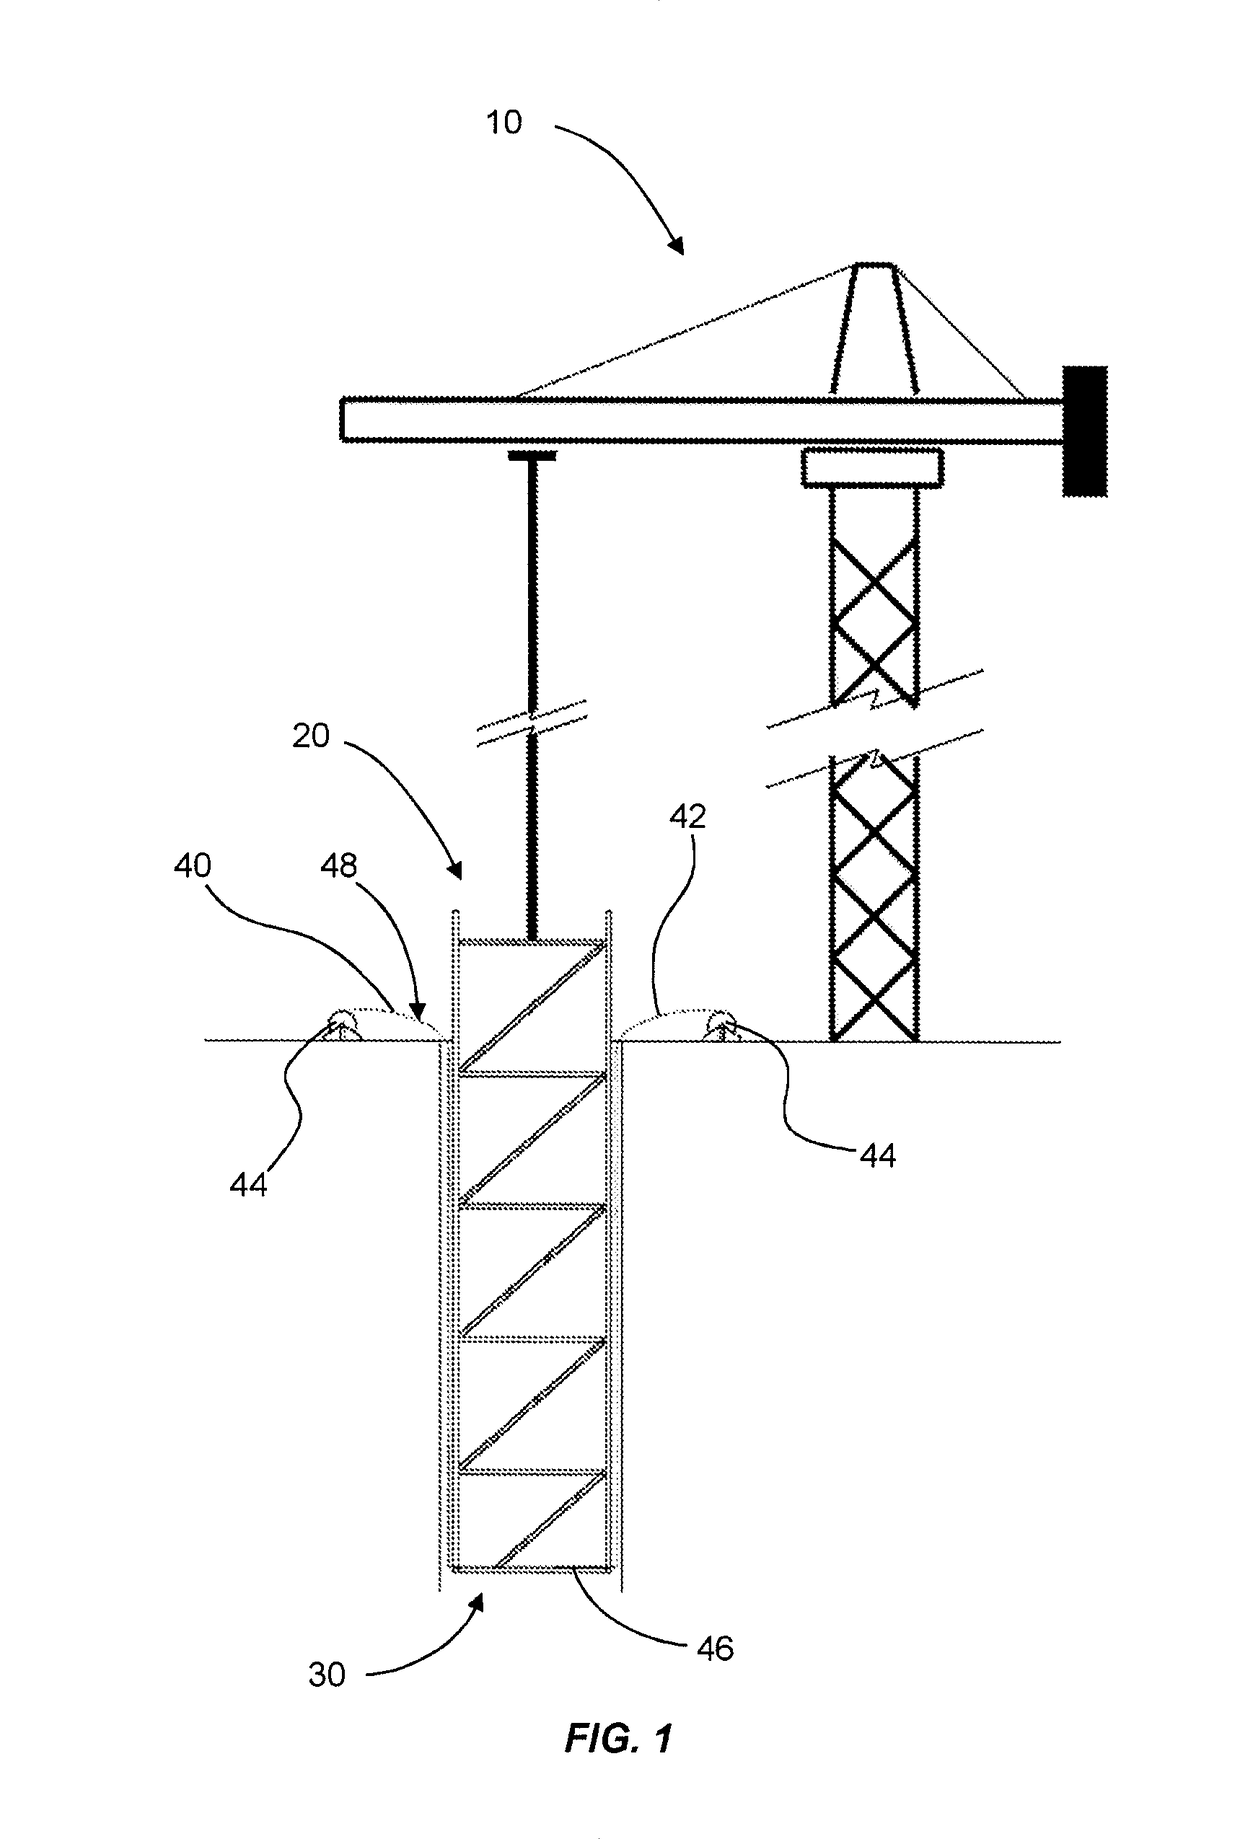 Method of monitoring subsurface concrete structures